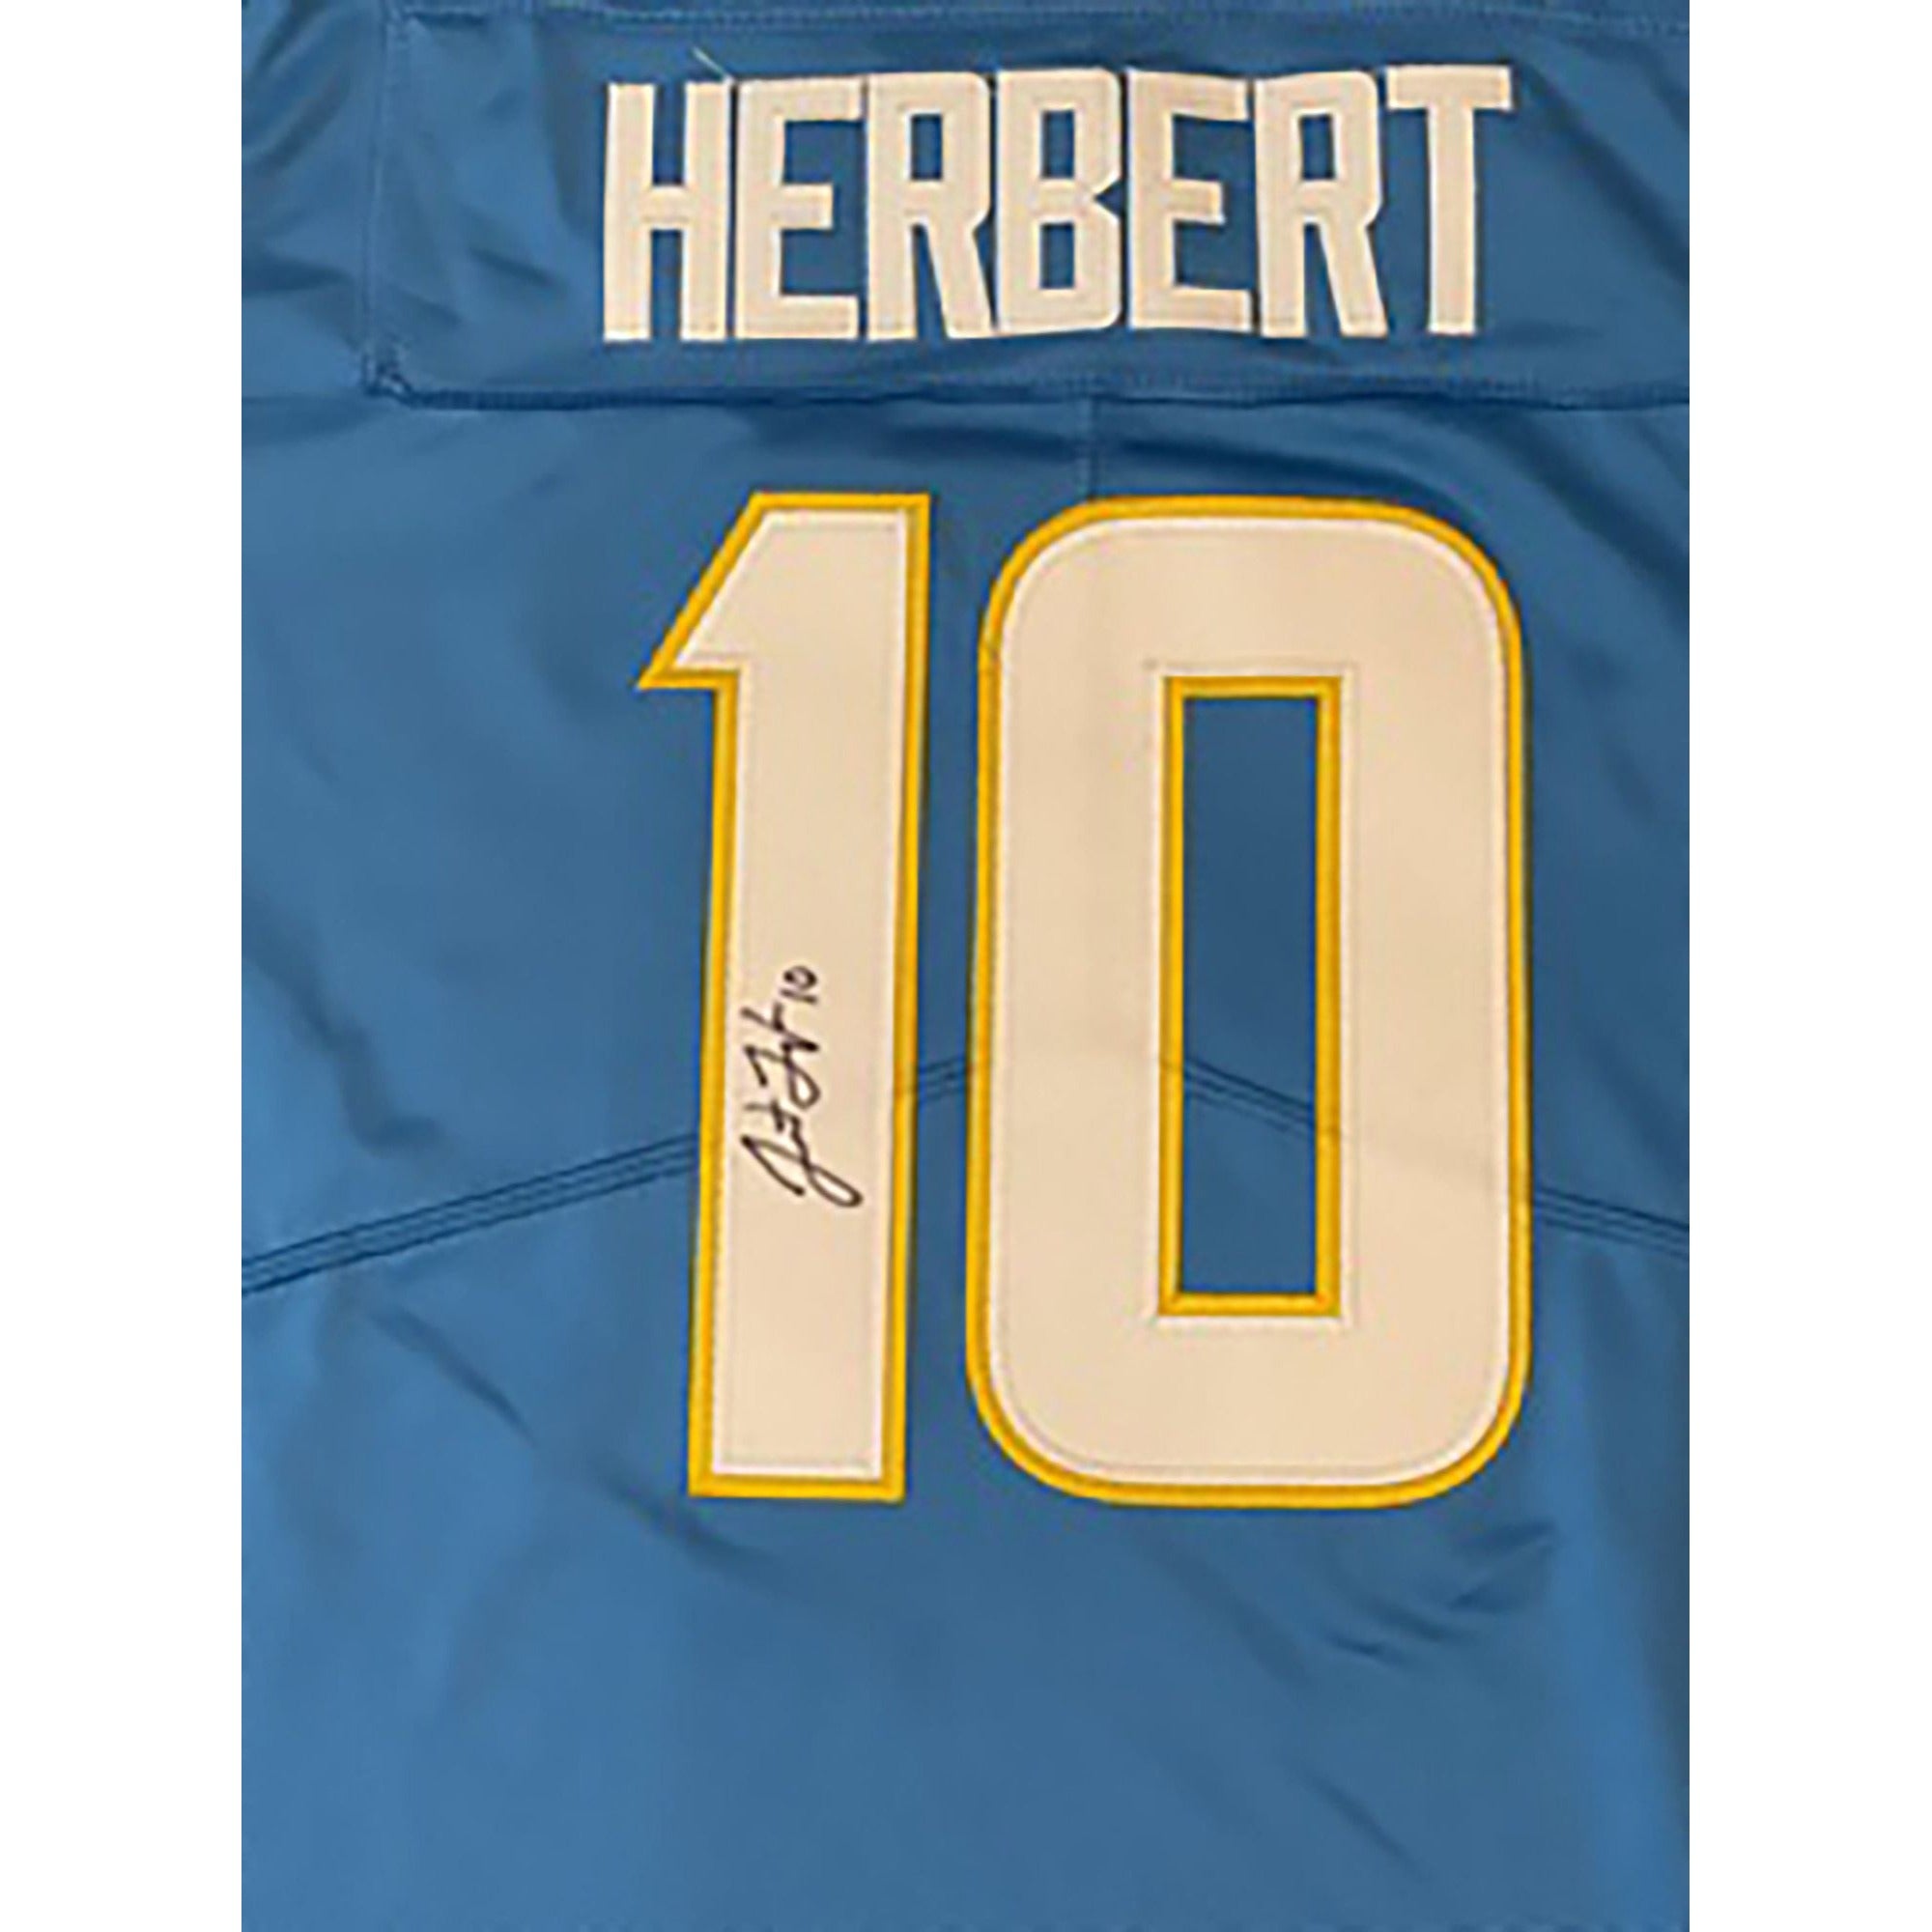 Justin Herbert signed jersey with proof